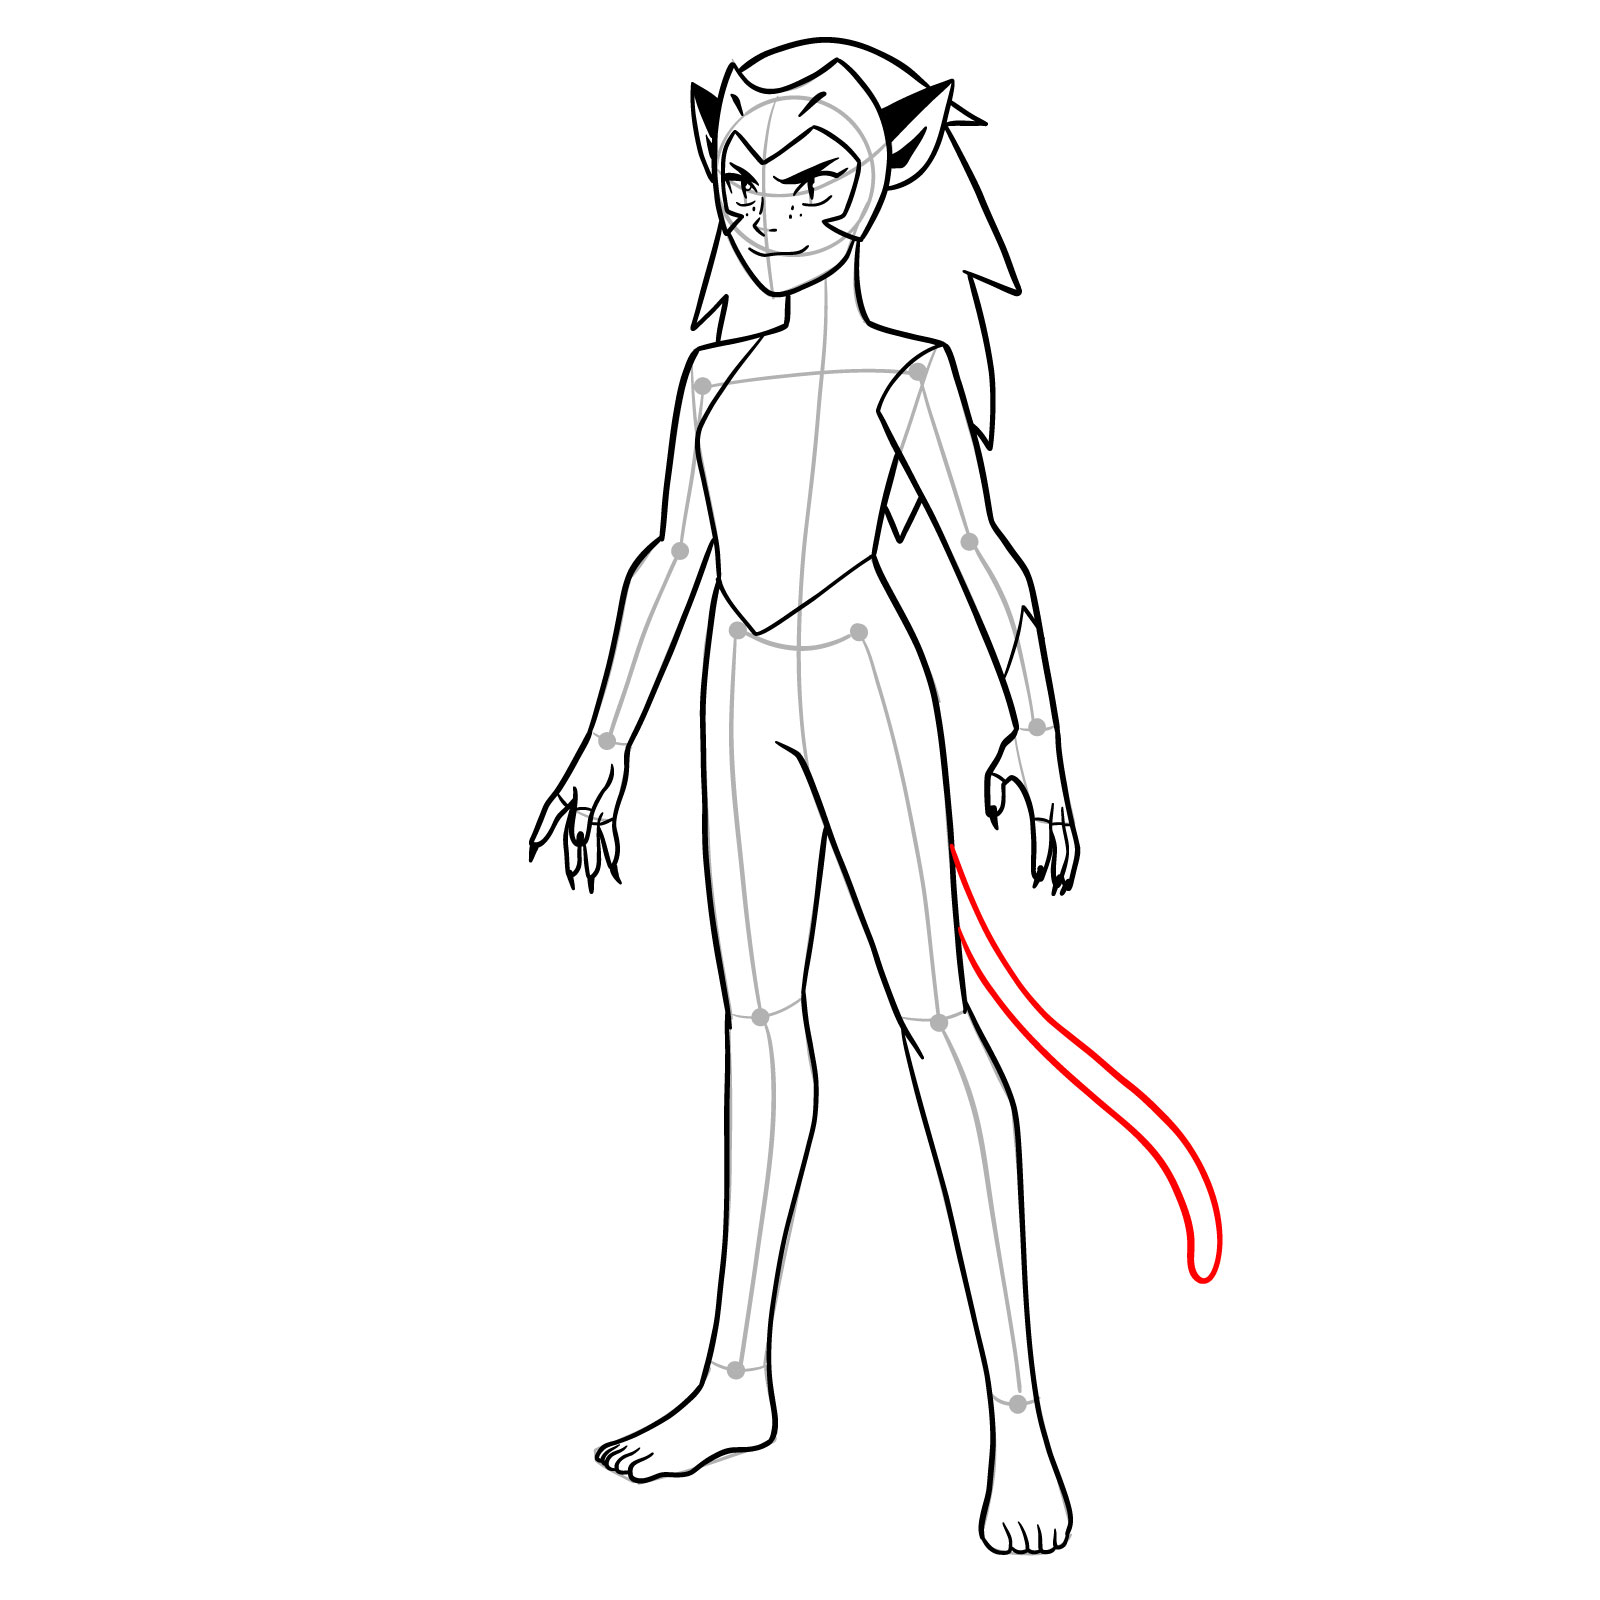 How to draw Catra from She-Ra and the Princesses of Power - step 16